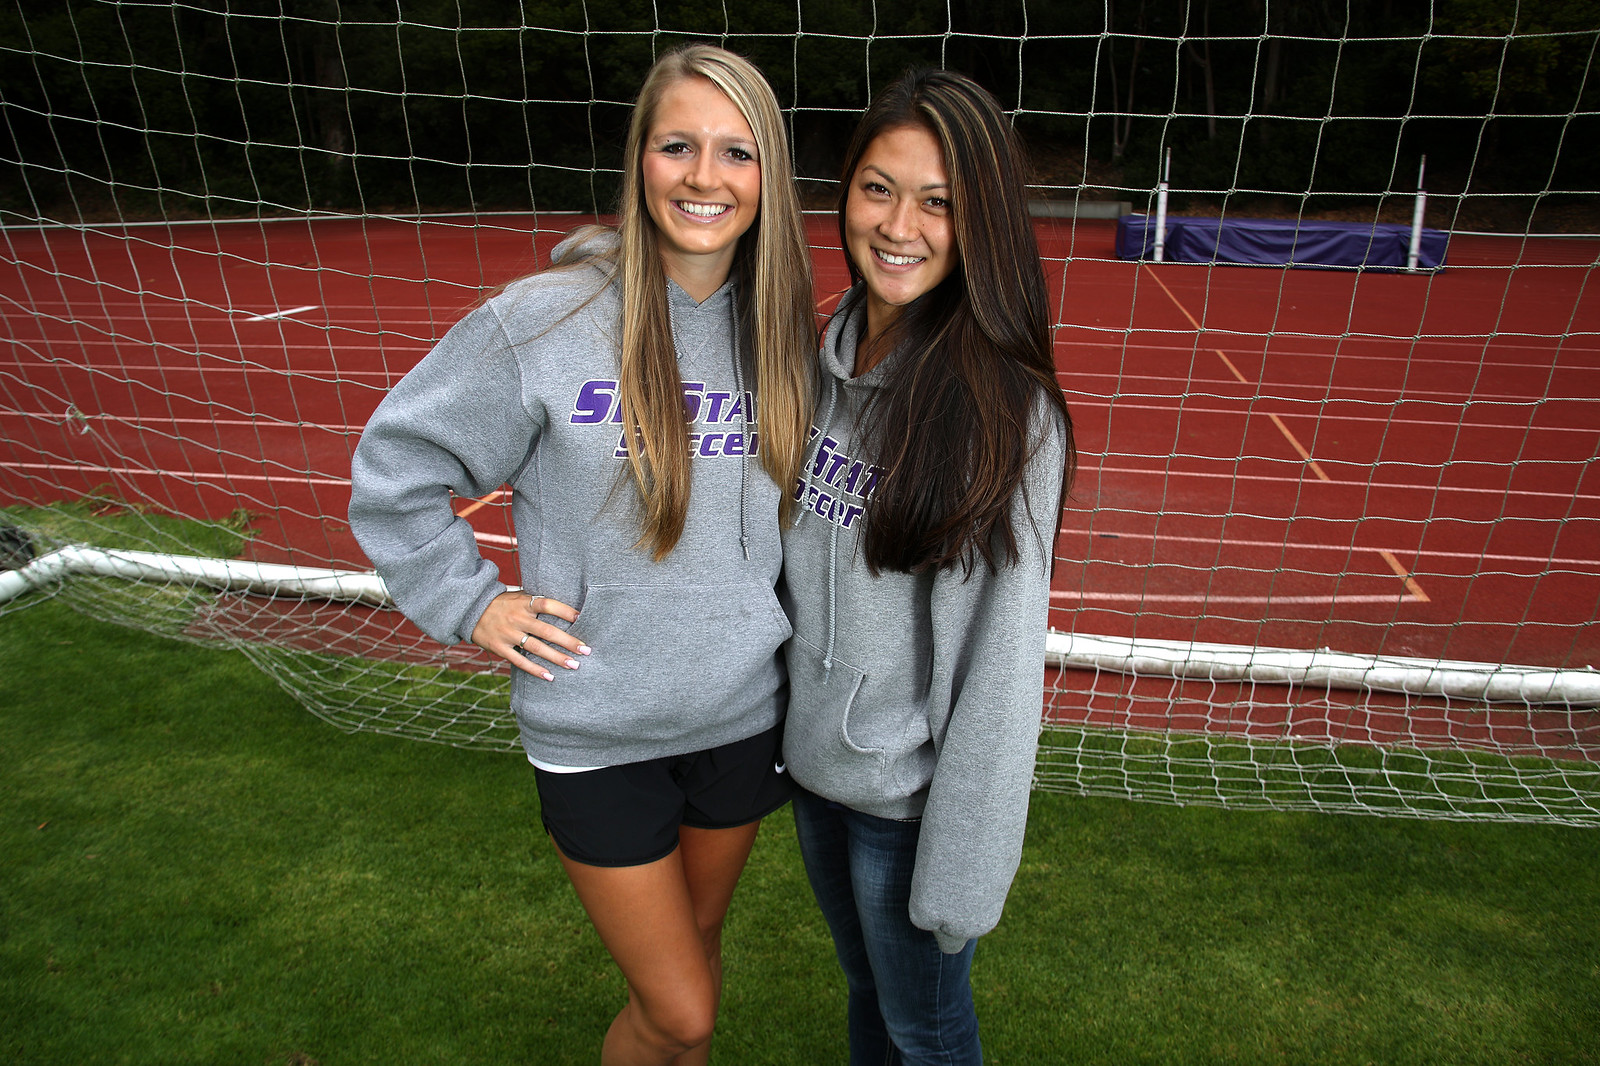 Chloe Harrington, left, and Lauren Hayano, right, are two of three SF State students to have been awarded the California Collegiate Athletic Association (CCAA) All-Academic award for the 2012-2013 school year. The award is given to varsity student-atheletes who complete a minimum of 24 units per year with at least a 3.4 GPA. Photo by John Ornelas / Xpress